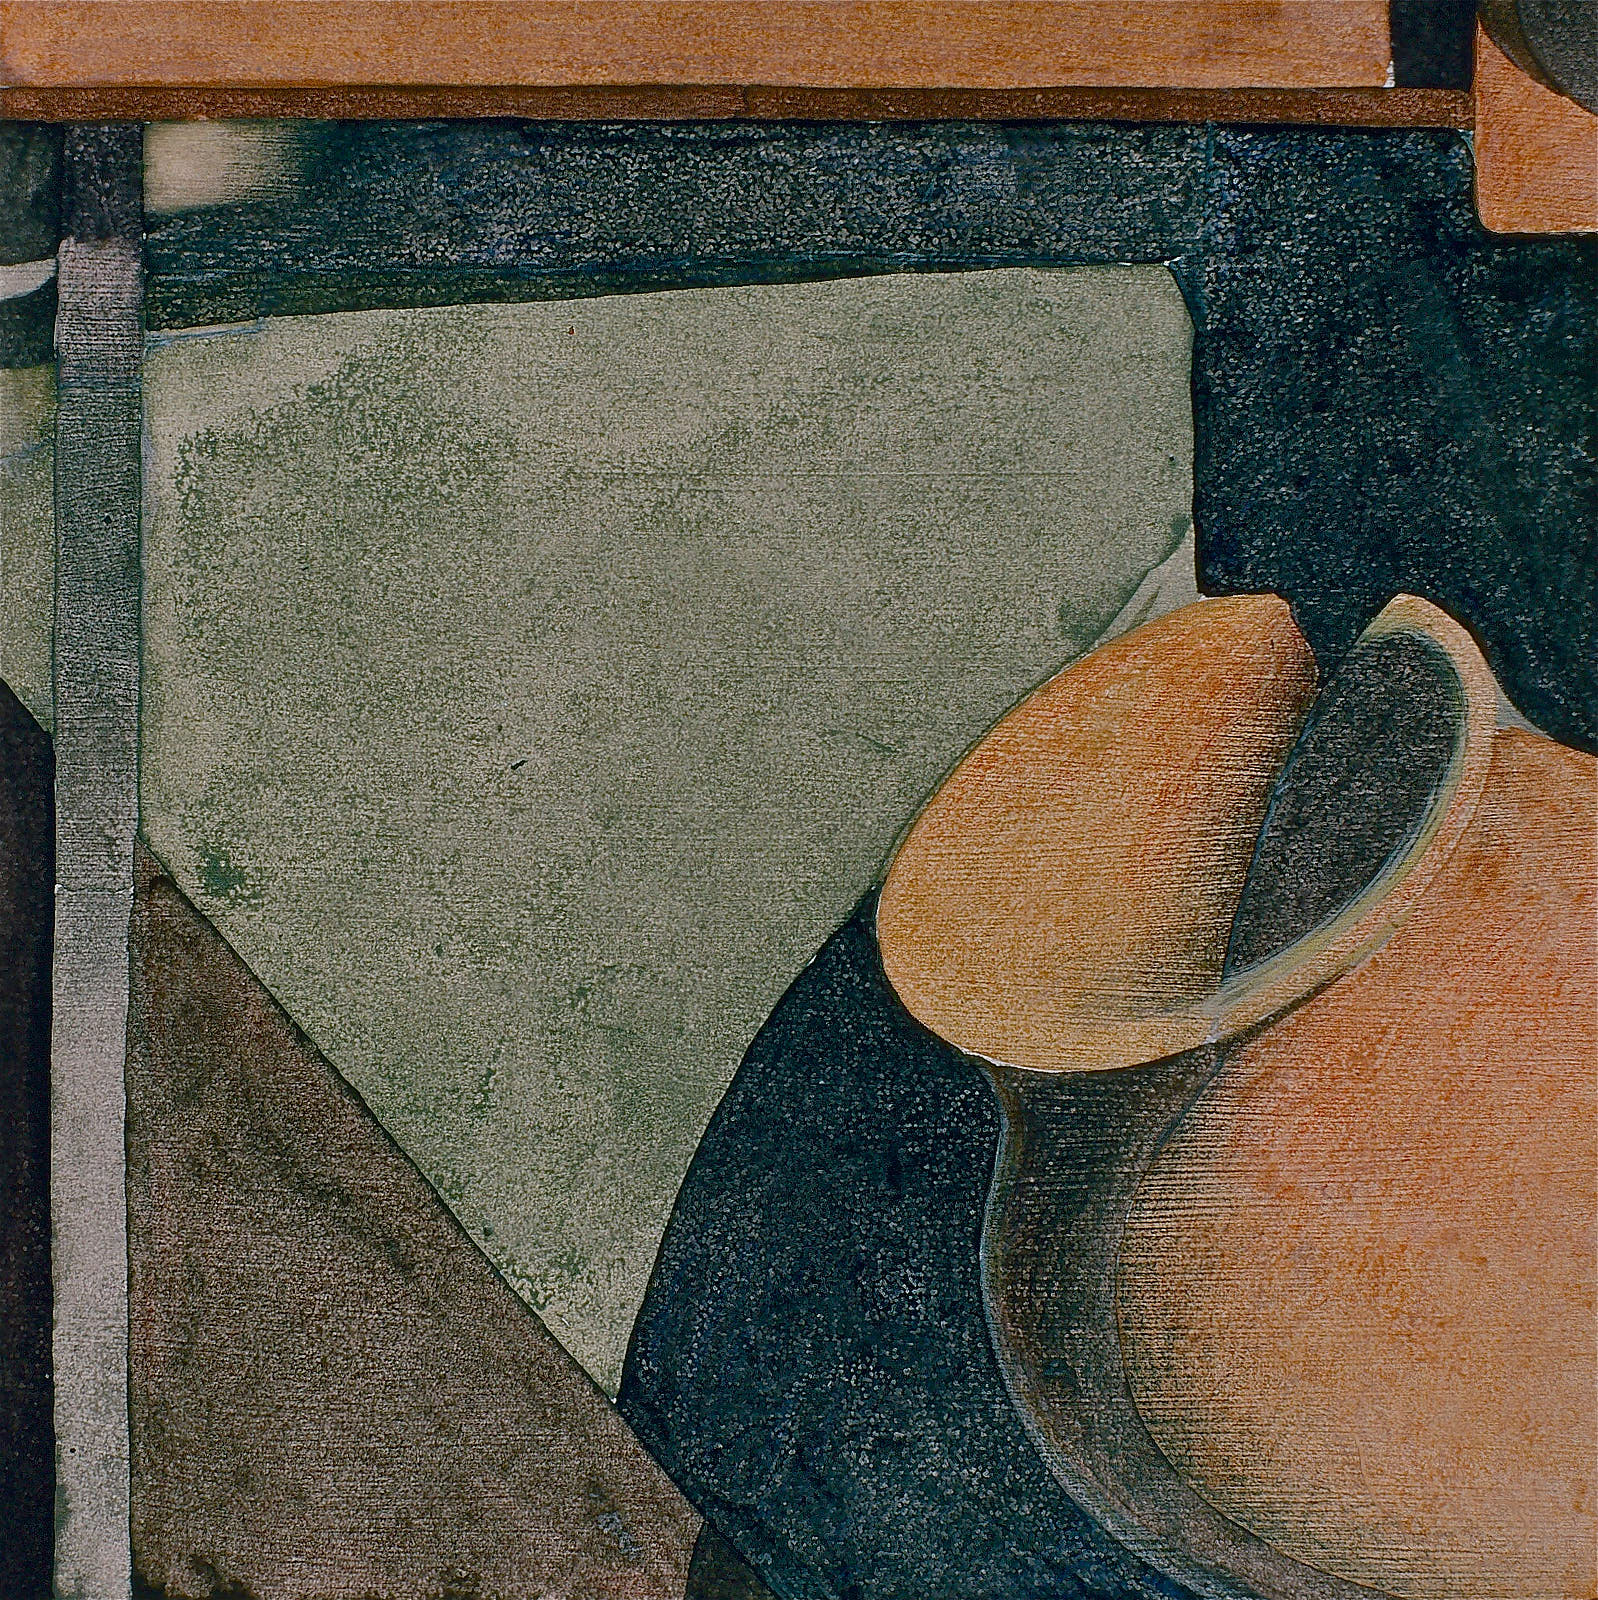 Still Life with Clay Pot  #3, 1995 gouache on paper. 11 x 11'' private collection